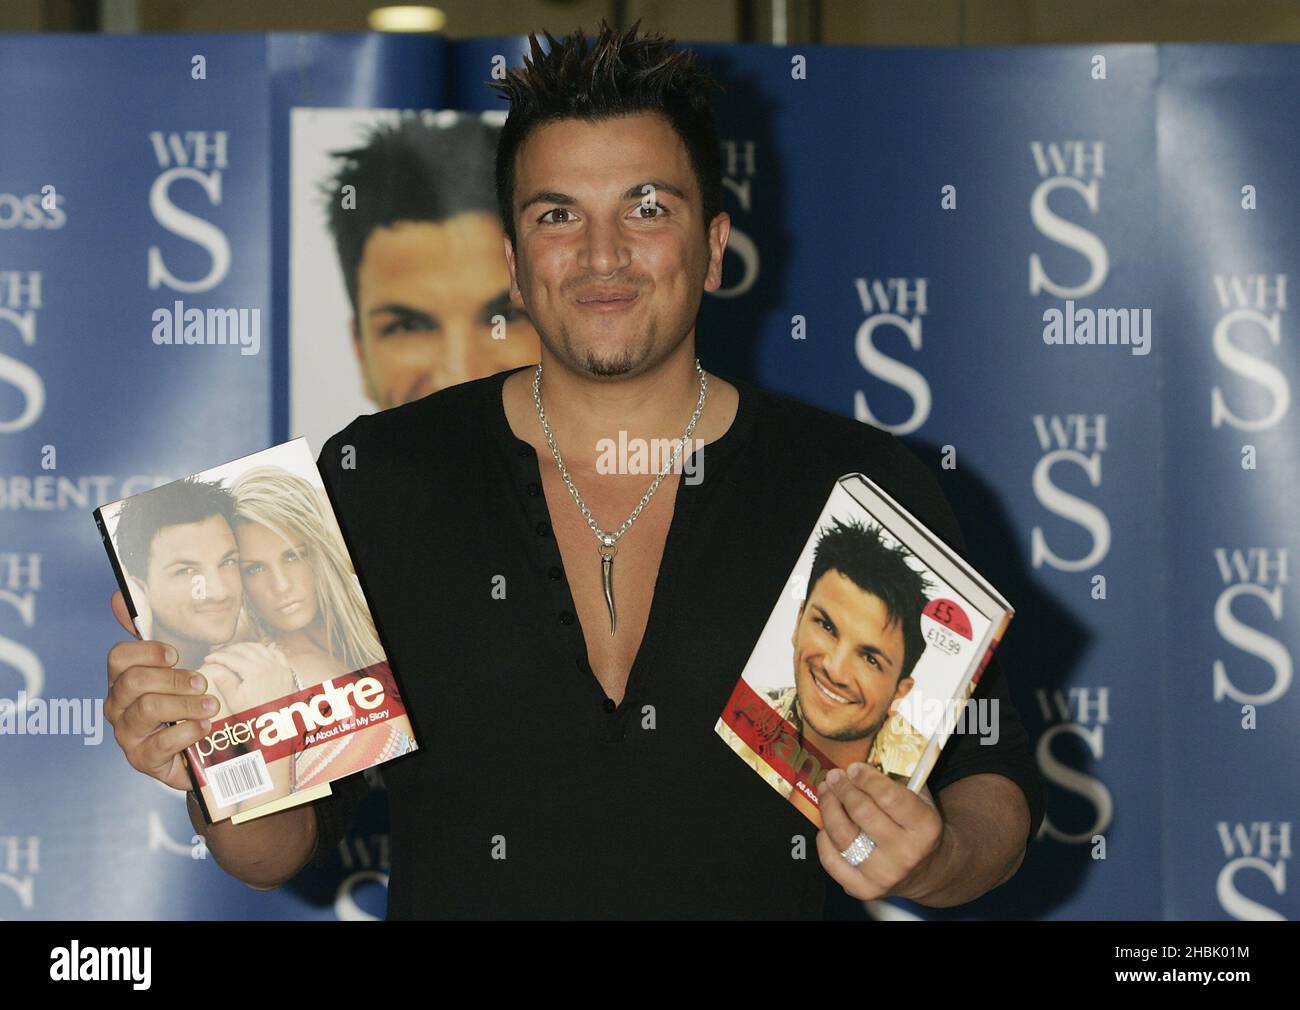 Peter Andre signing copies of his new book All About Us: My Story - WH  Smith, Brent Cross Shopping Centre, London. Entertainment Stock Photo -  Alamy